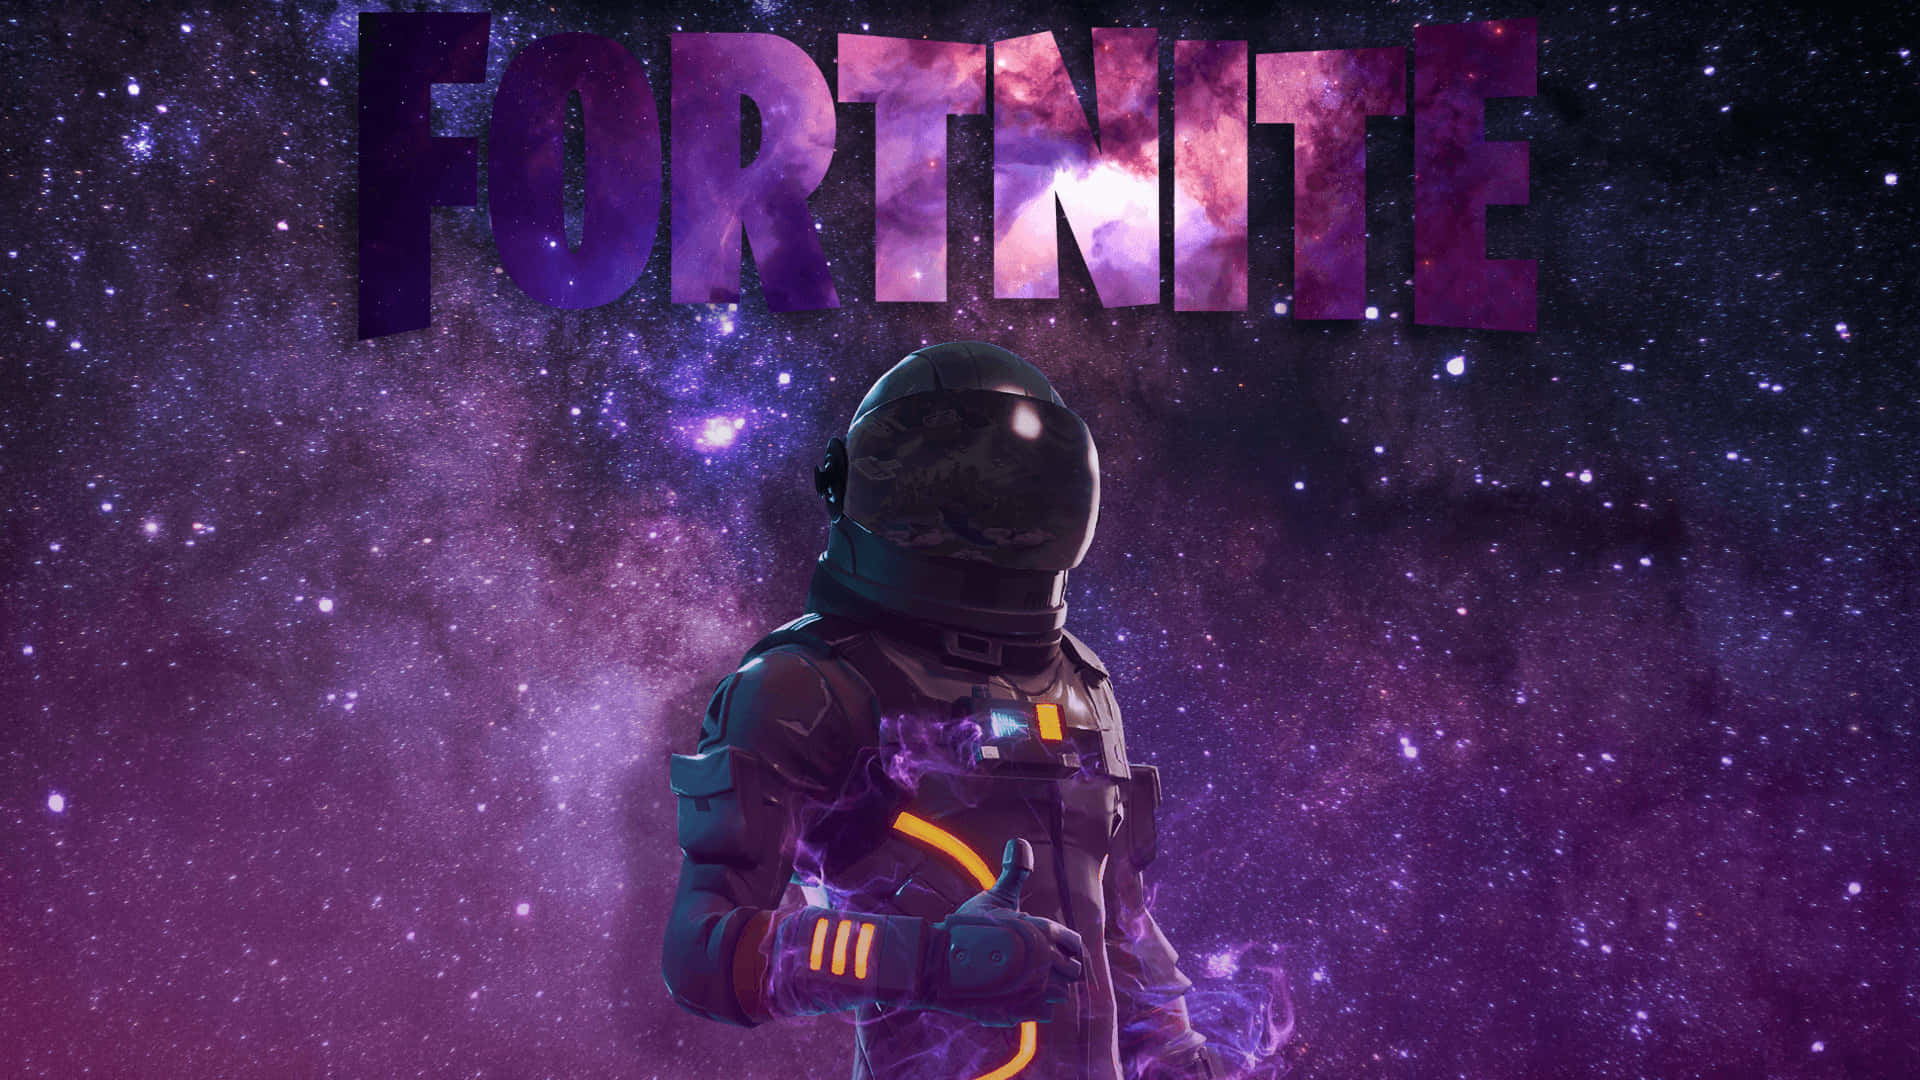 Experience the thrill of Fortnite Galaxy Wallpaper